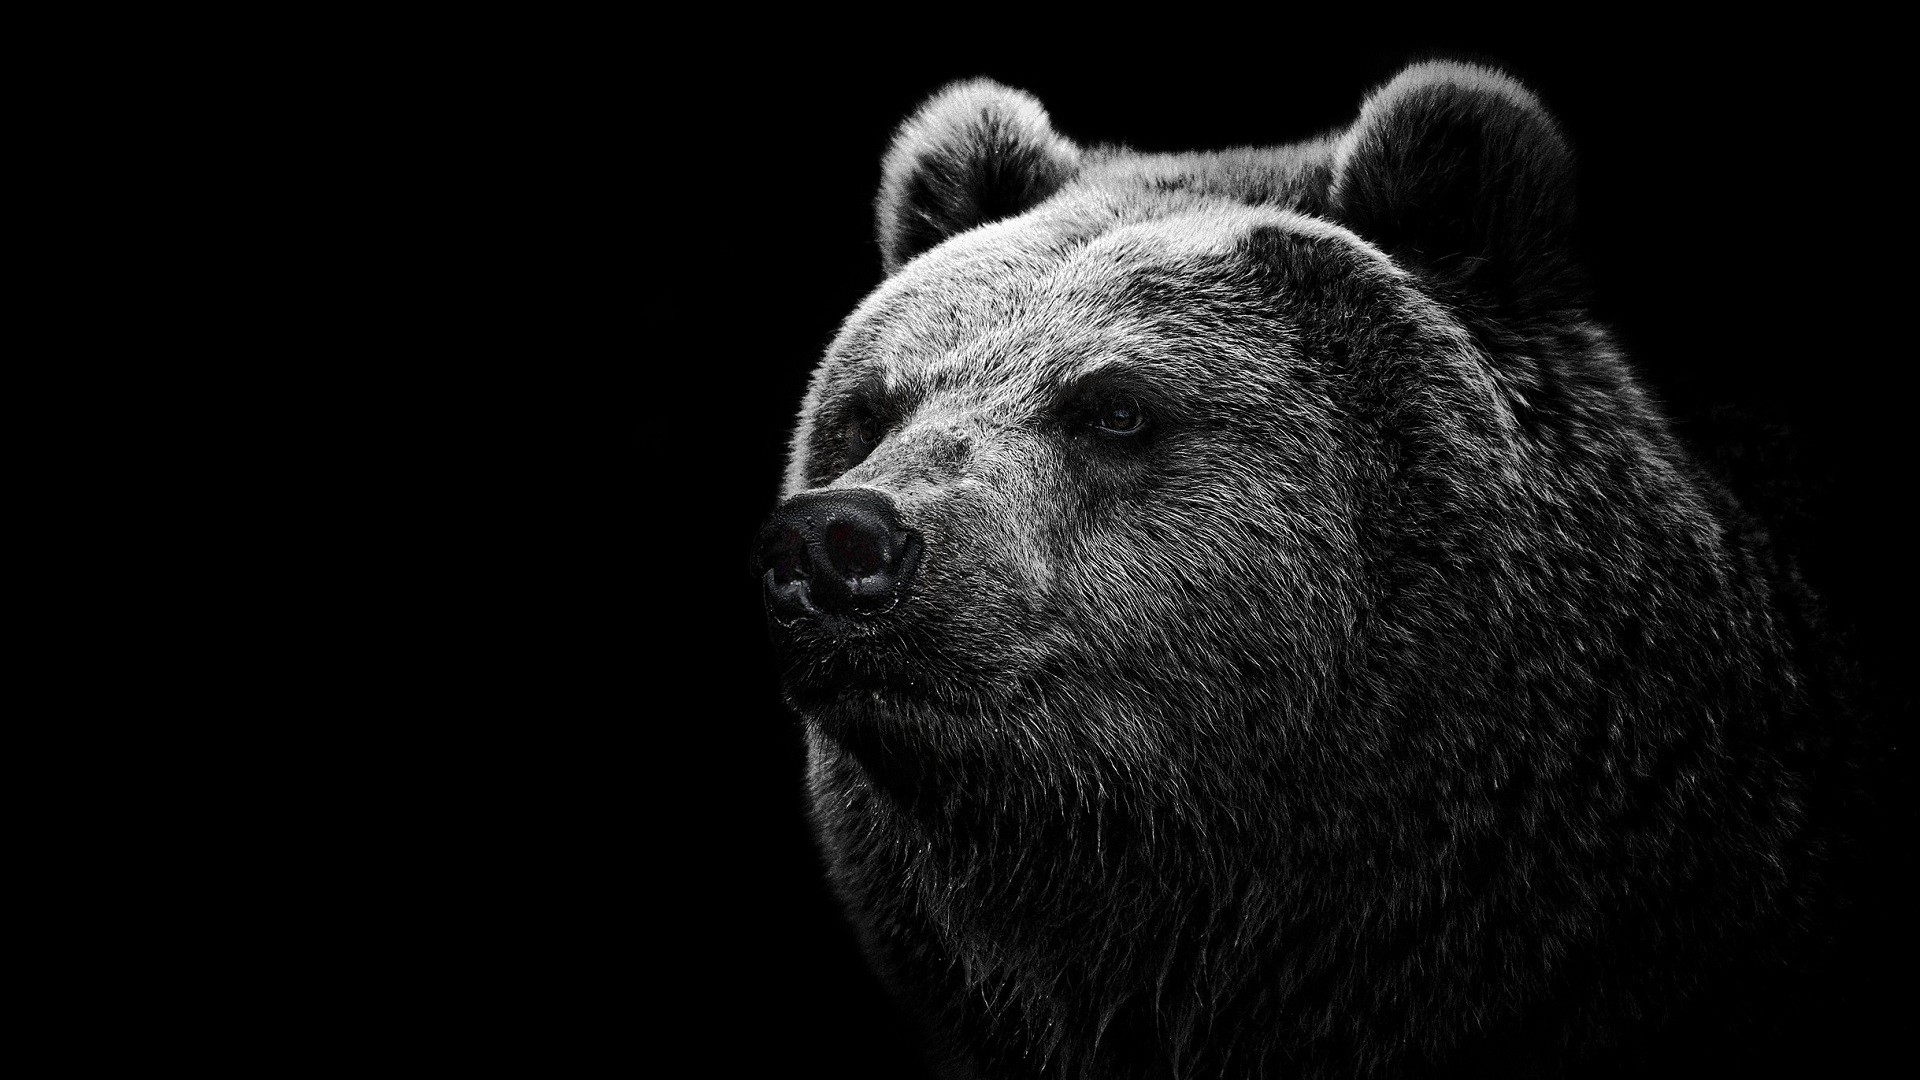 General 1920x1080 bears grizzly bear animals monochrome simple background mammals black background